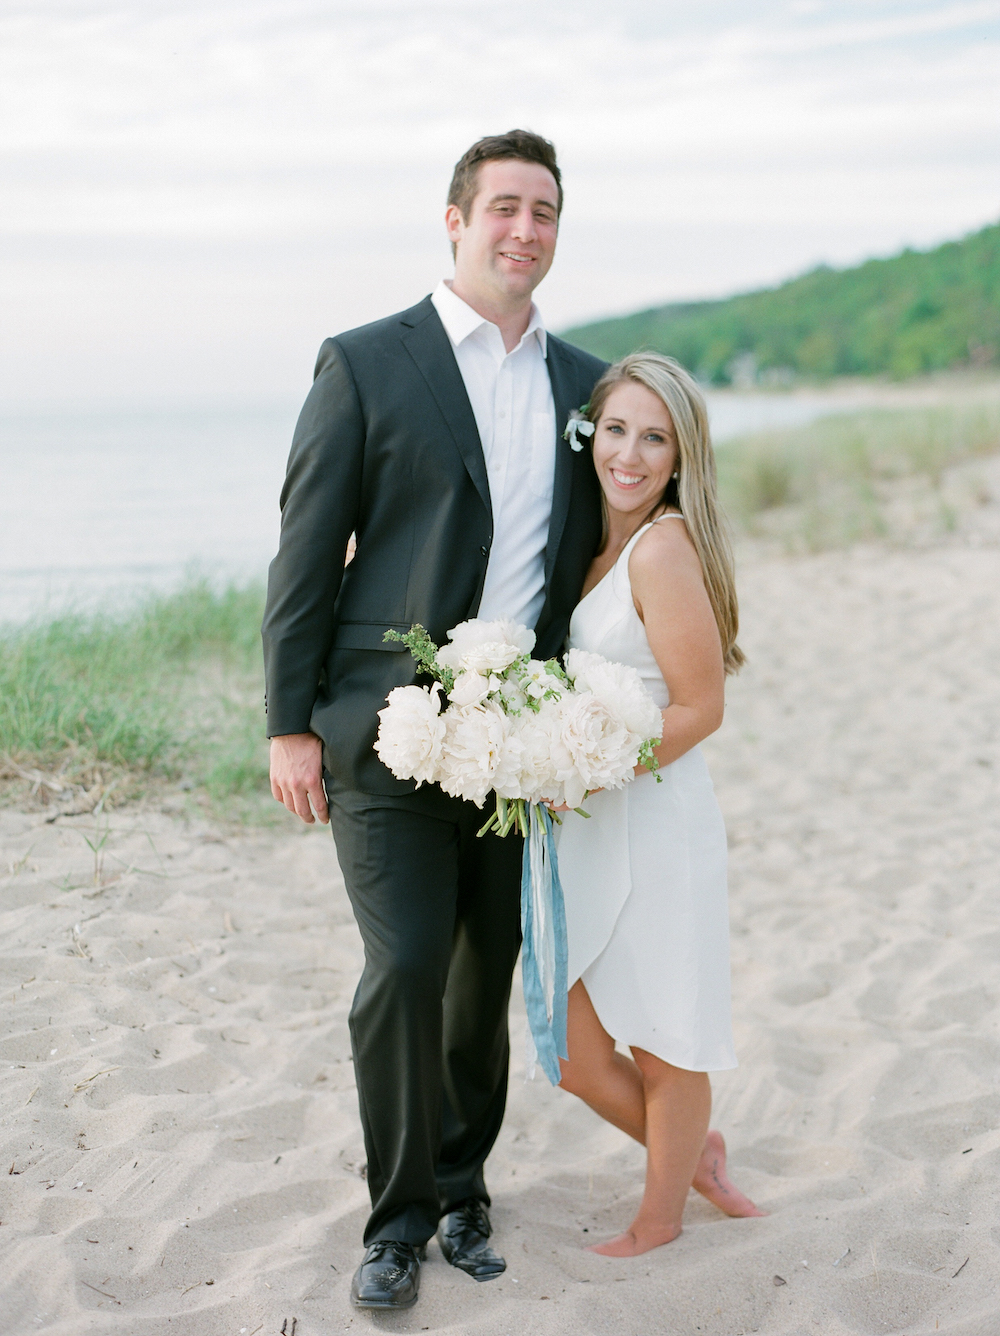 A couple smiling during the lake michigan beach wedding